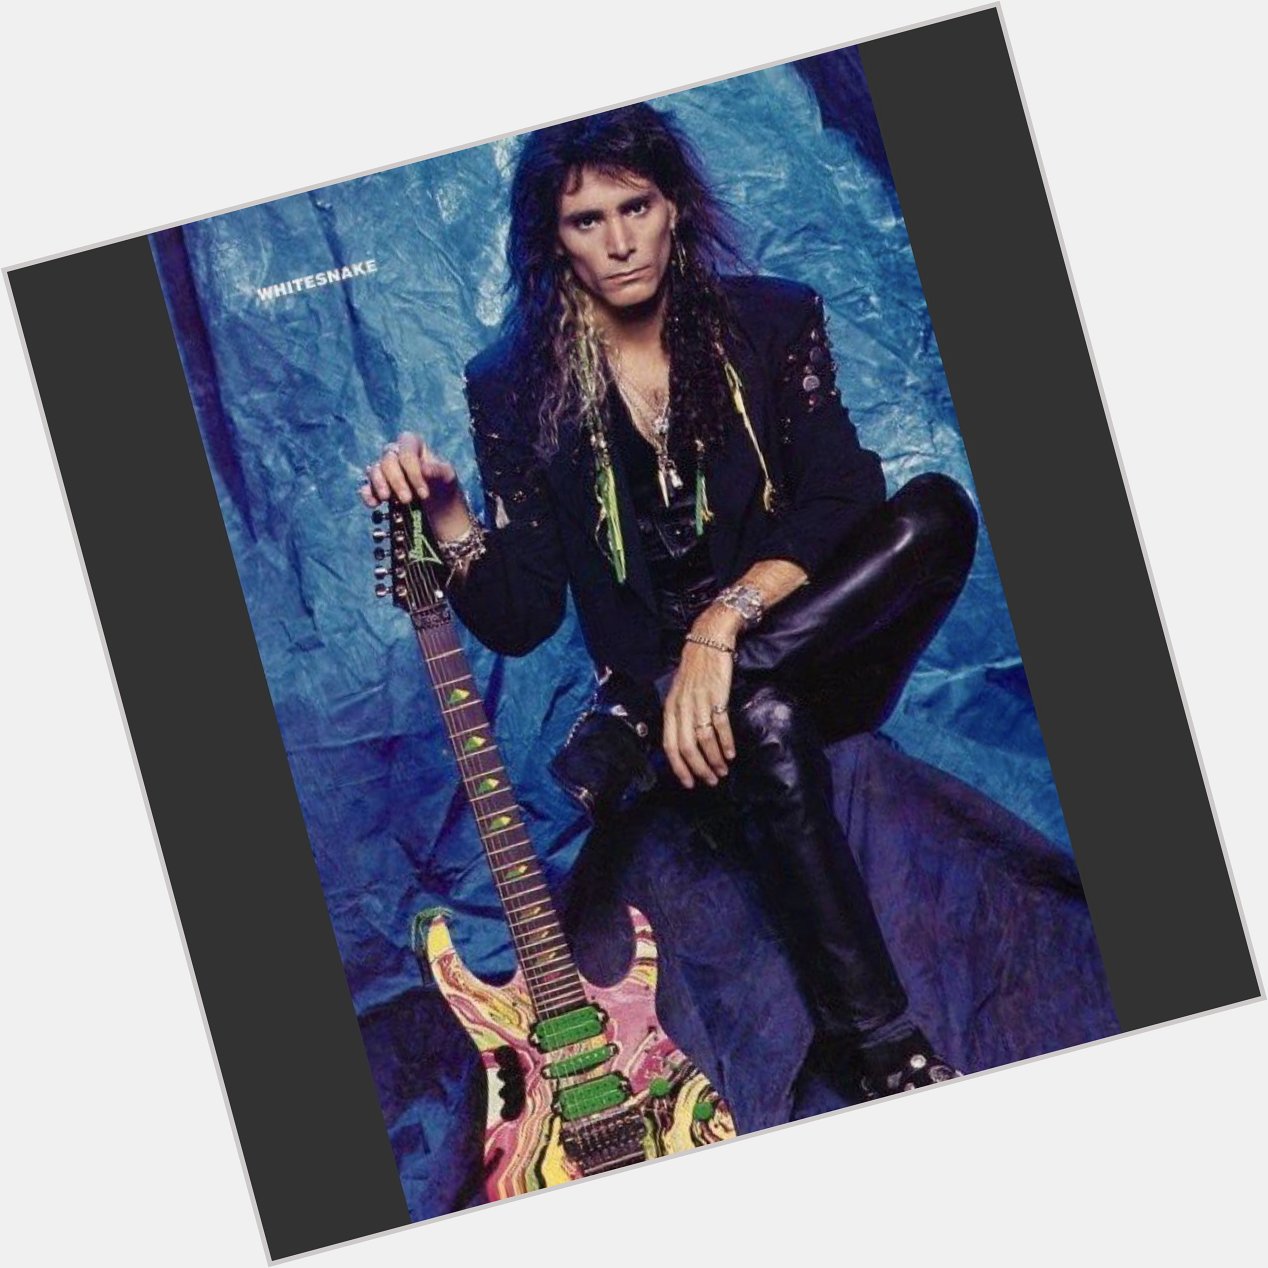 Happy Belated Birthday to the great Steve Vai!  